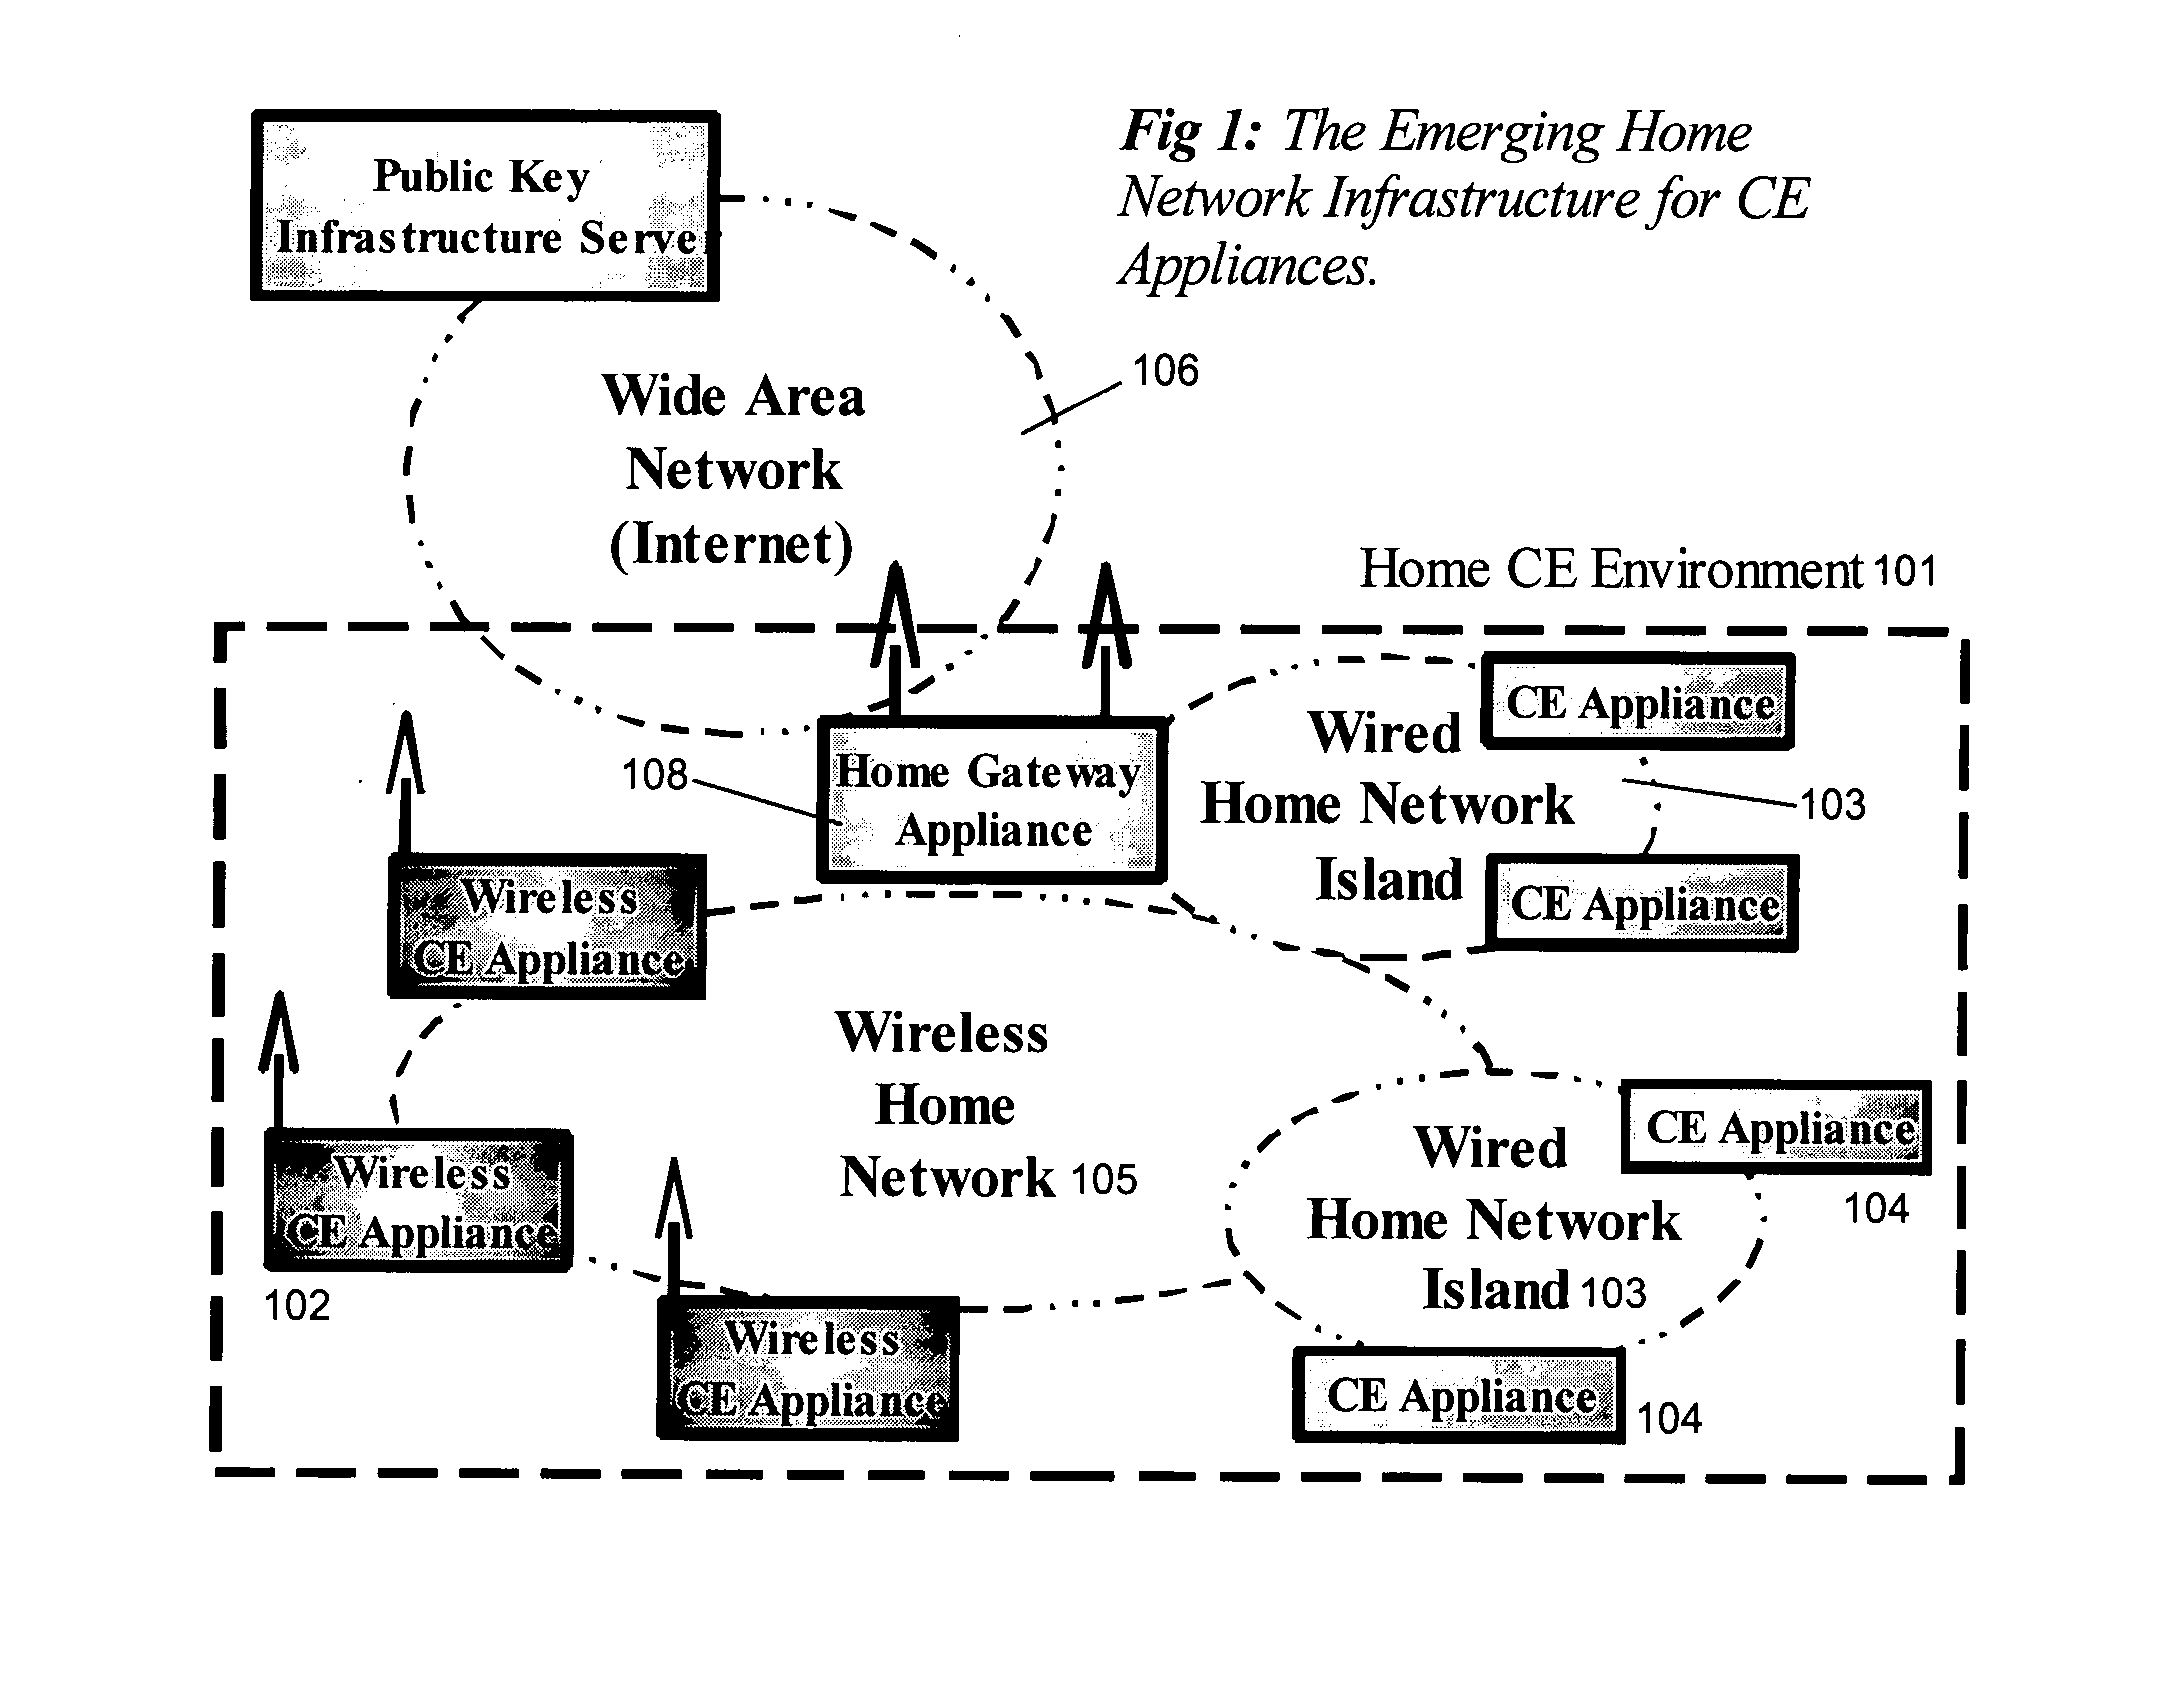 Synchronizing Multi-Channel Speakers Over a Network